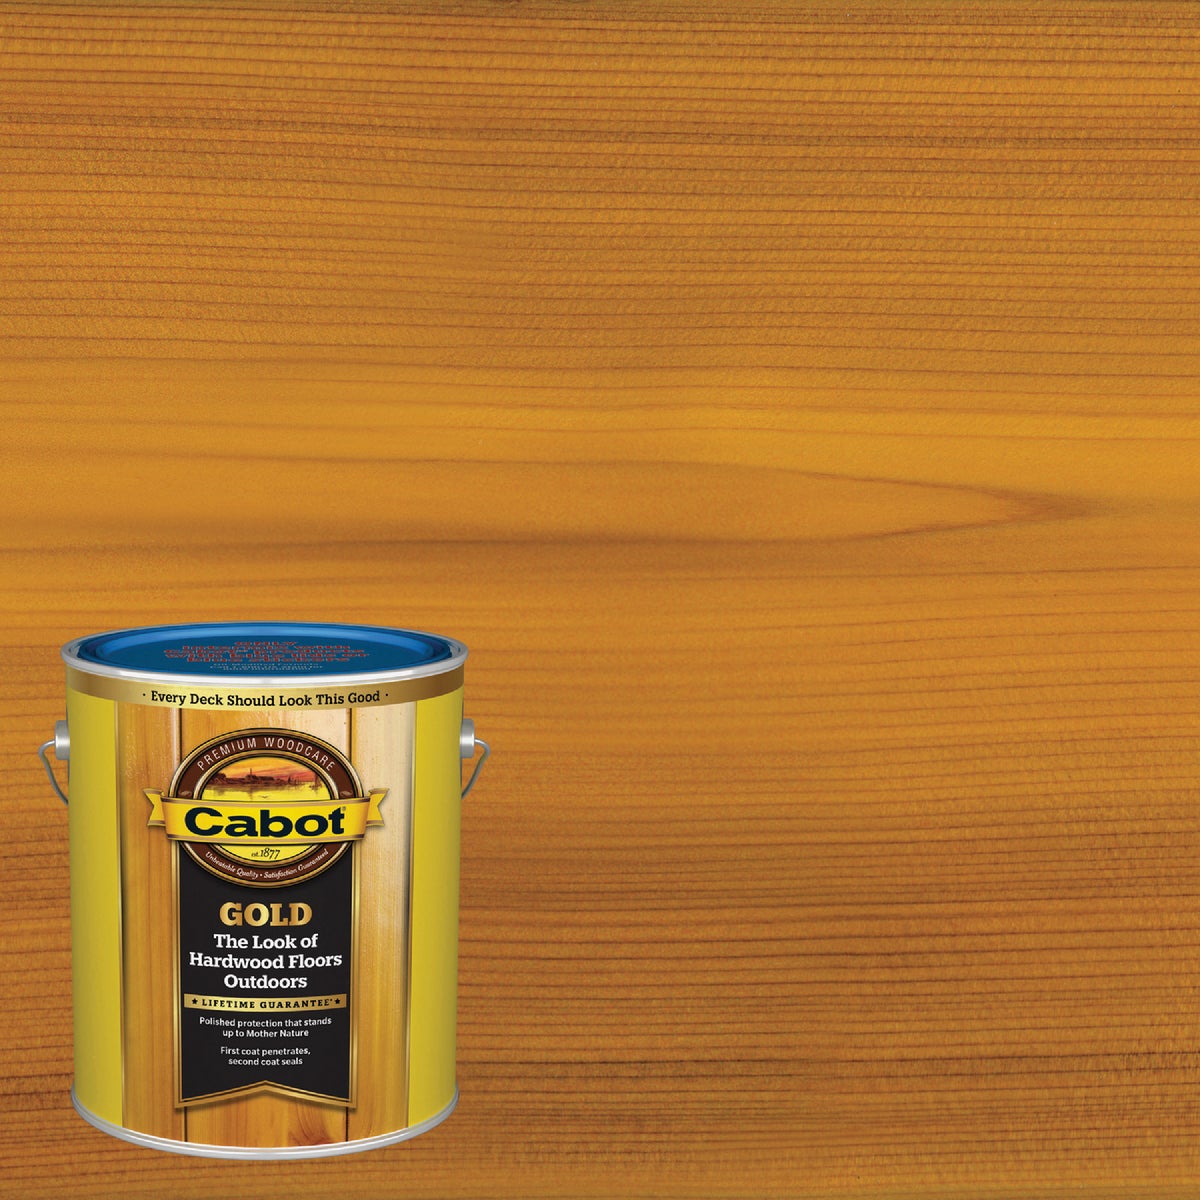 Item 771577, Cabot Gold is the ultimate finish and polished protection perfect for decks